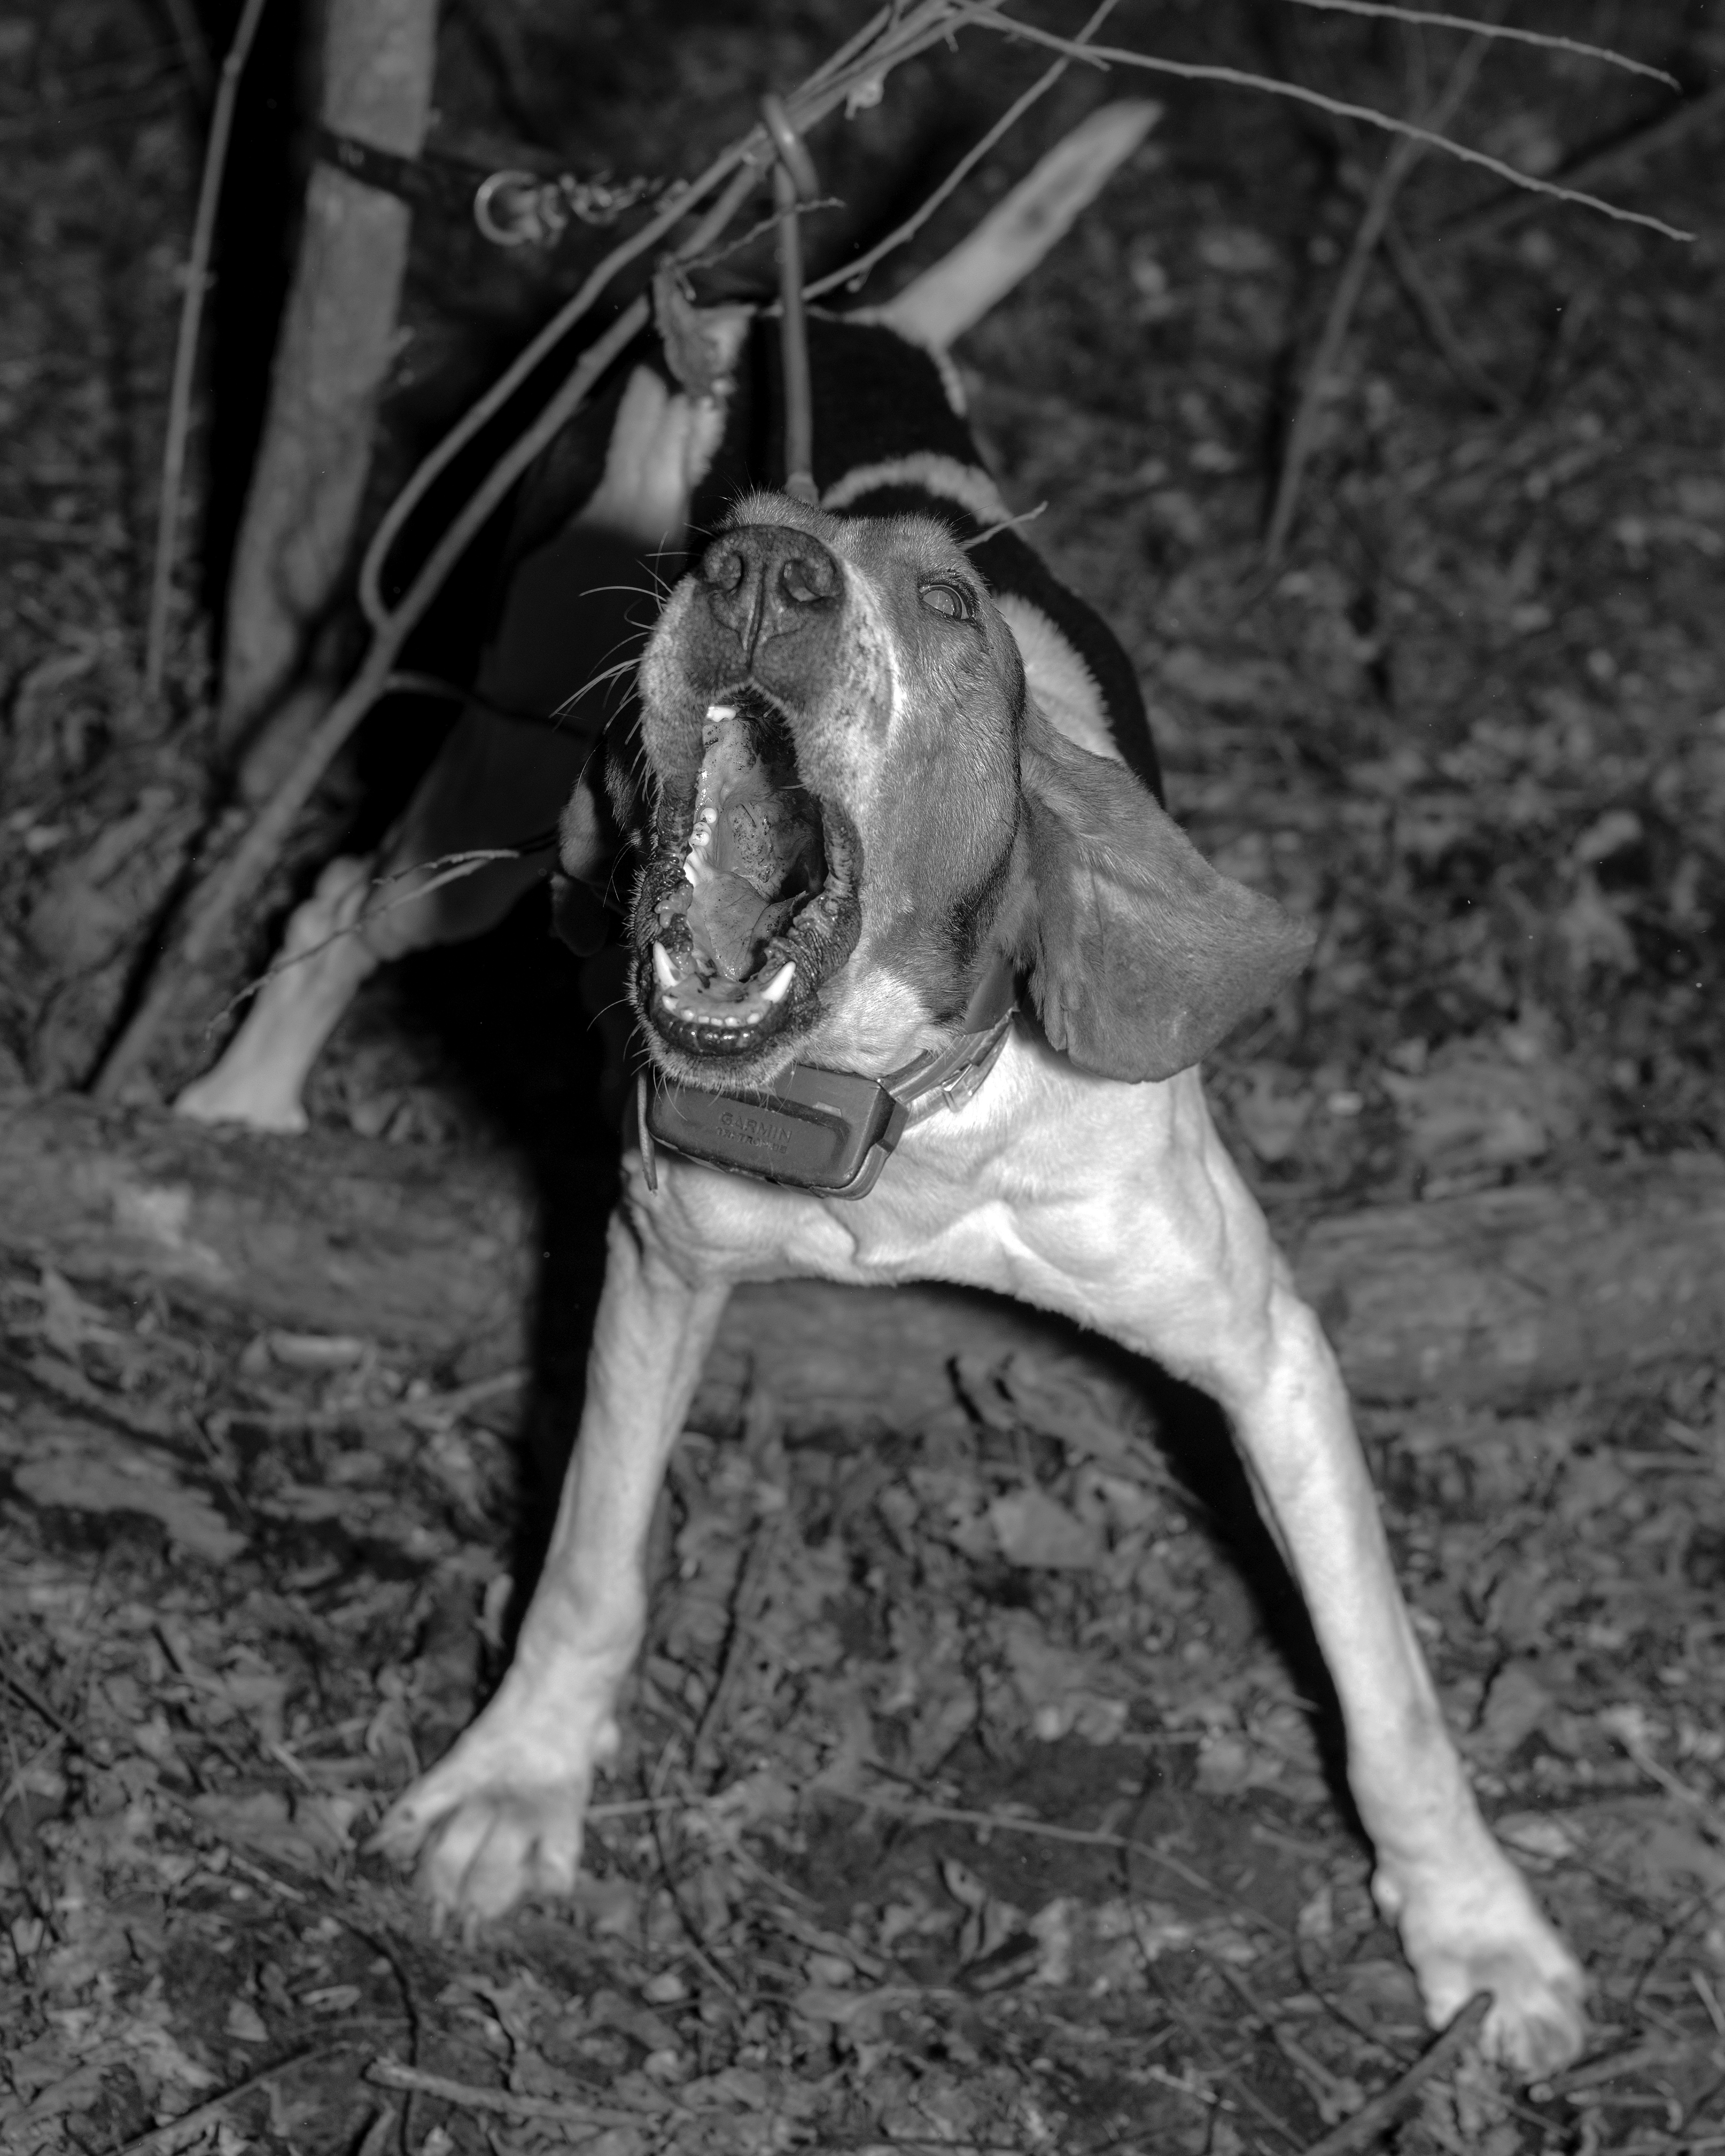 Houston Cofield, Bluetick Hound, 2020, Archival Inkjet Print, Attribution: A Manner of Living, Changed